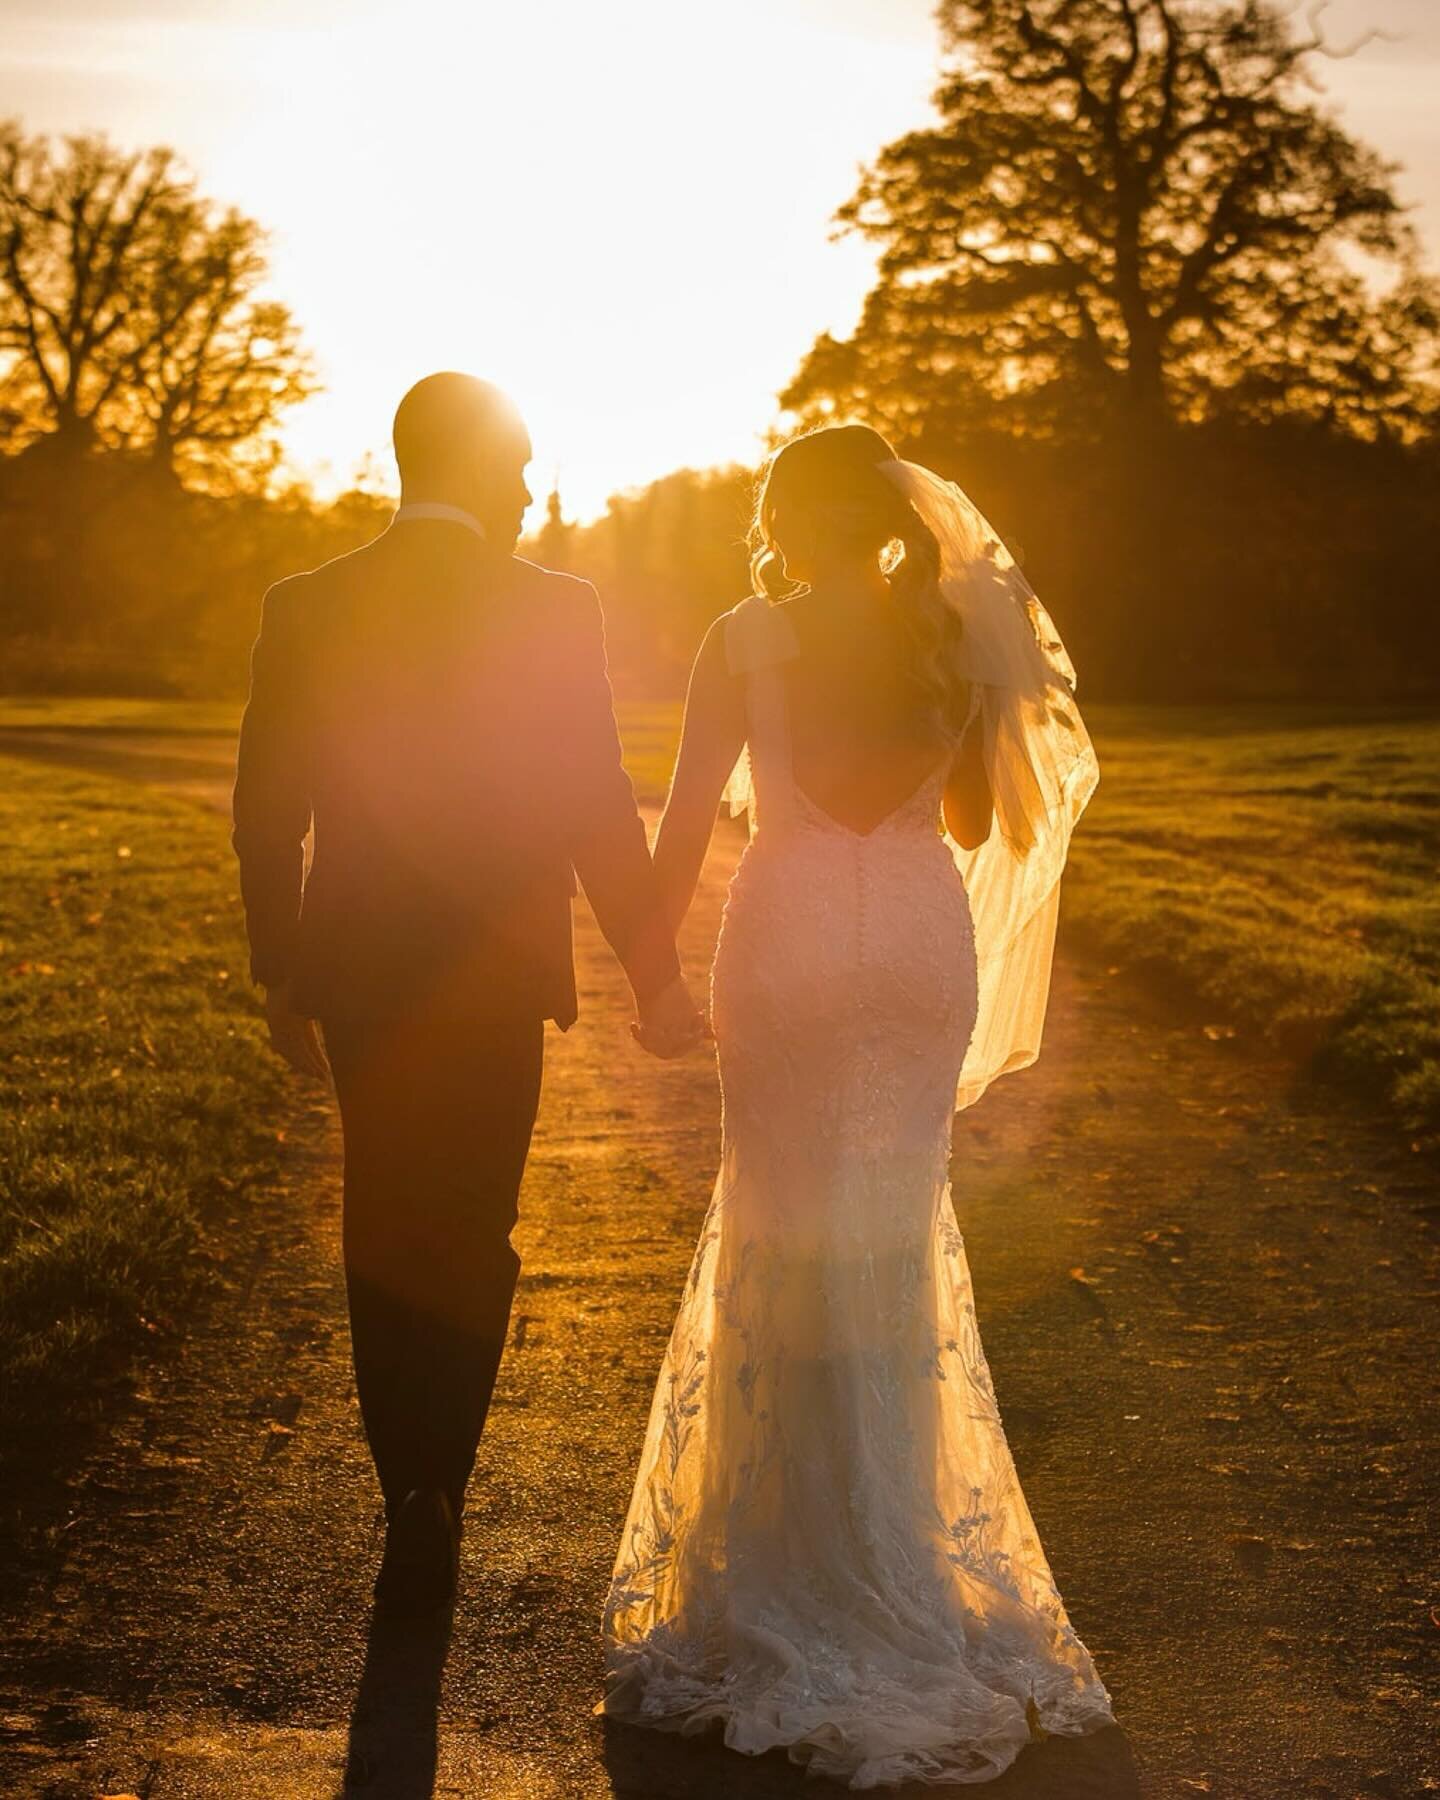 Orchardleigh Estate is a beautiful wedding venue located in Frome in the county of Somerset. I&rsquo;ve worked as a wedding photographer at this venue for 10 years now, working at their walled garden venue @elmhaypark_orchardleigh as well is the main